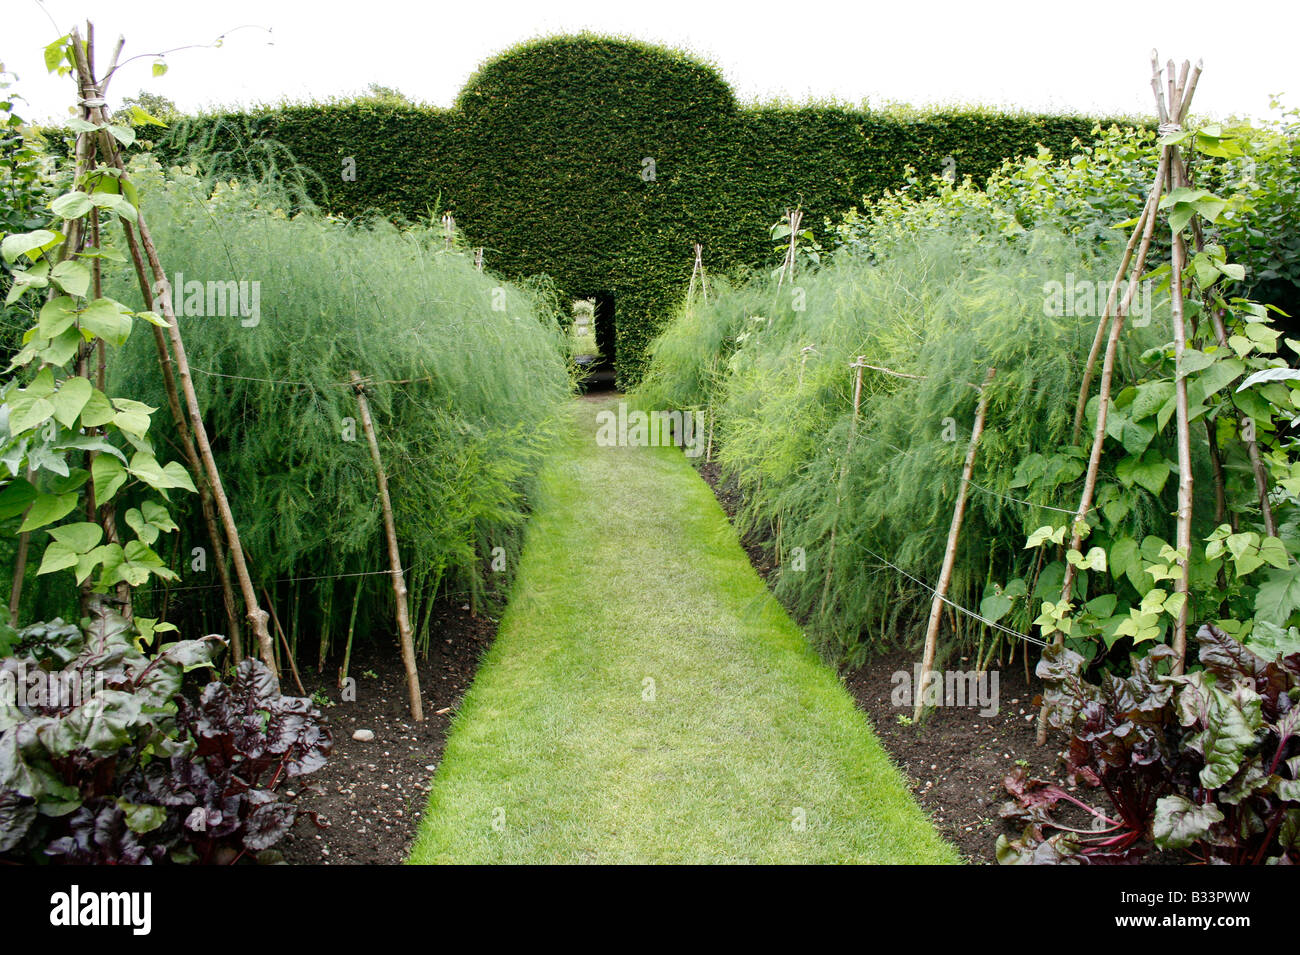 Asparagus growing in the vegetable garden at Levens Hall, Cumbria, The Lake District, UK. Stock Photo